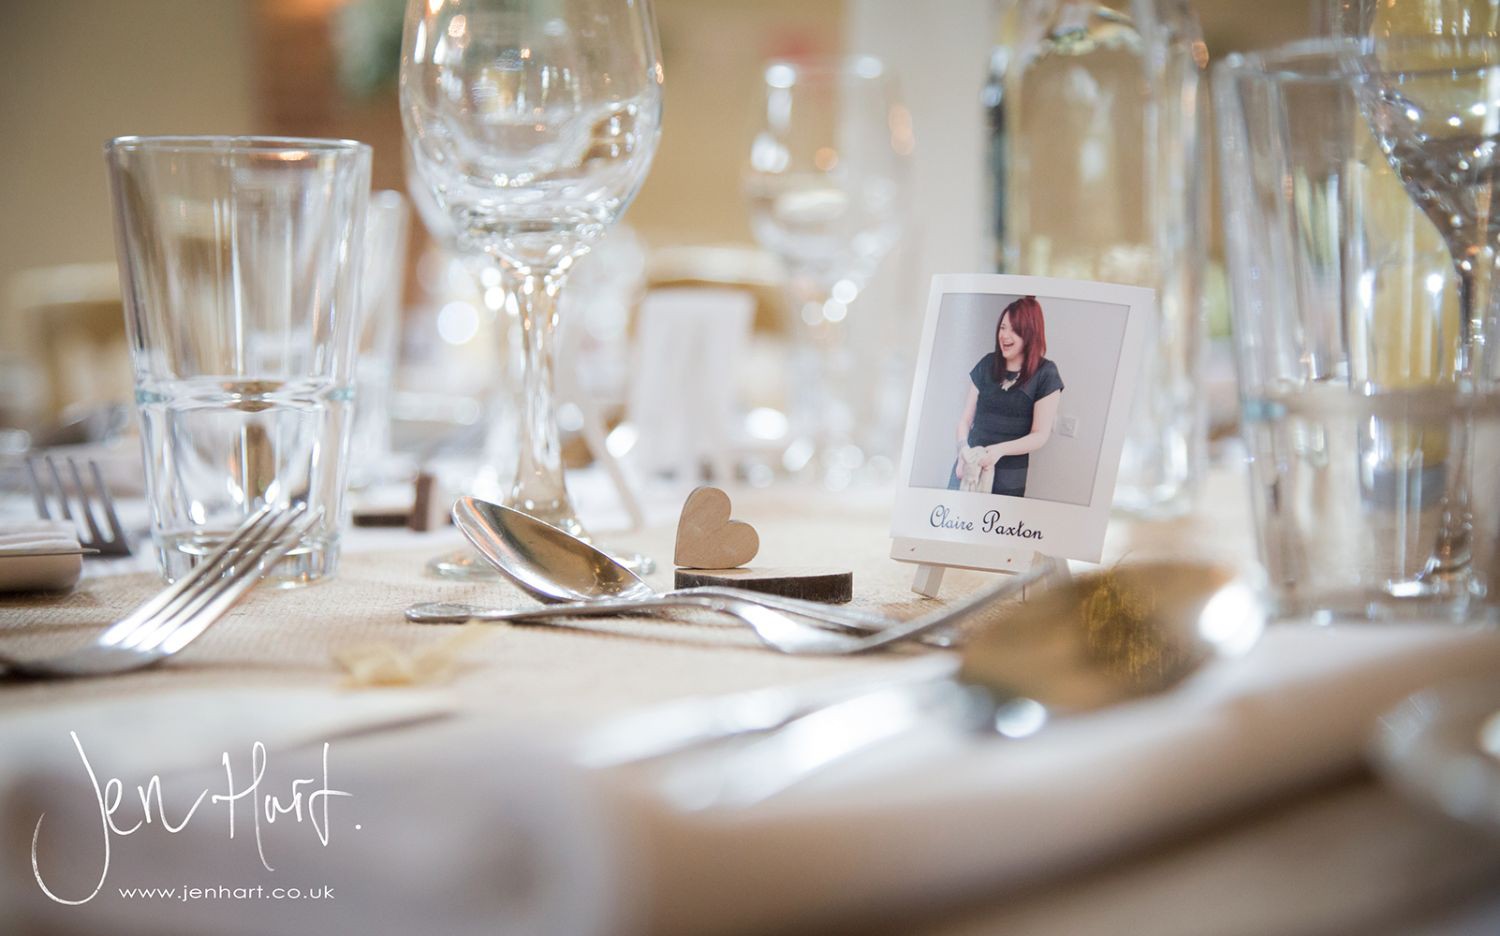 Photograph-Wedding-Whinstone-View_02May15_218